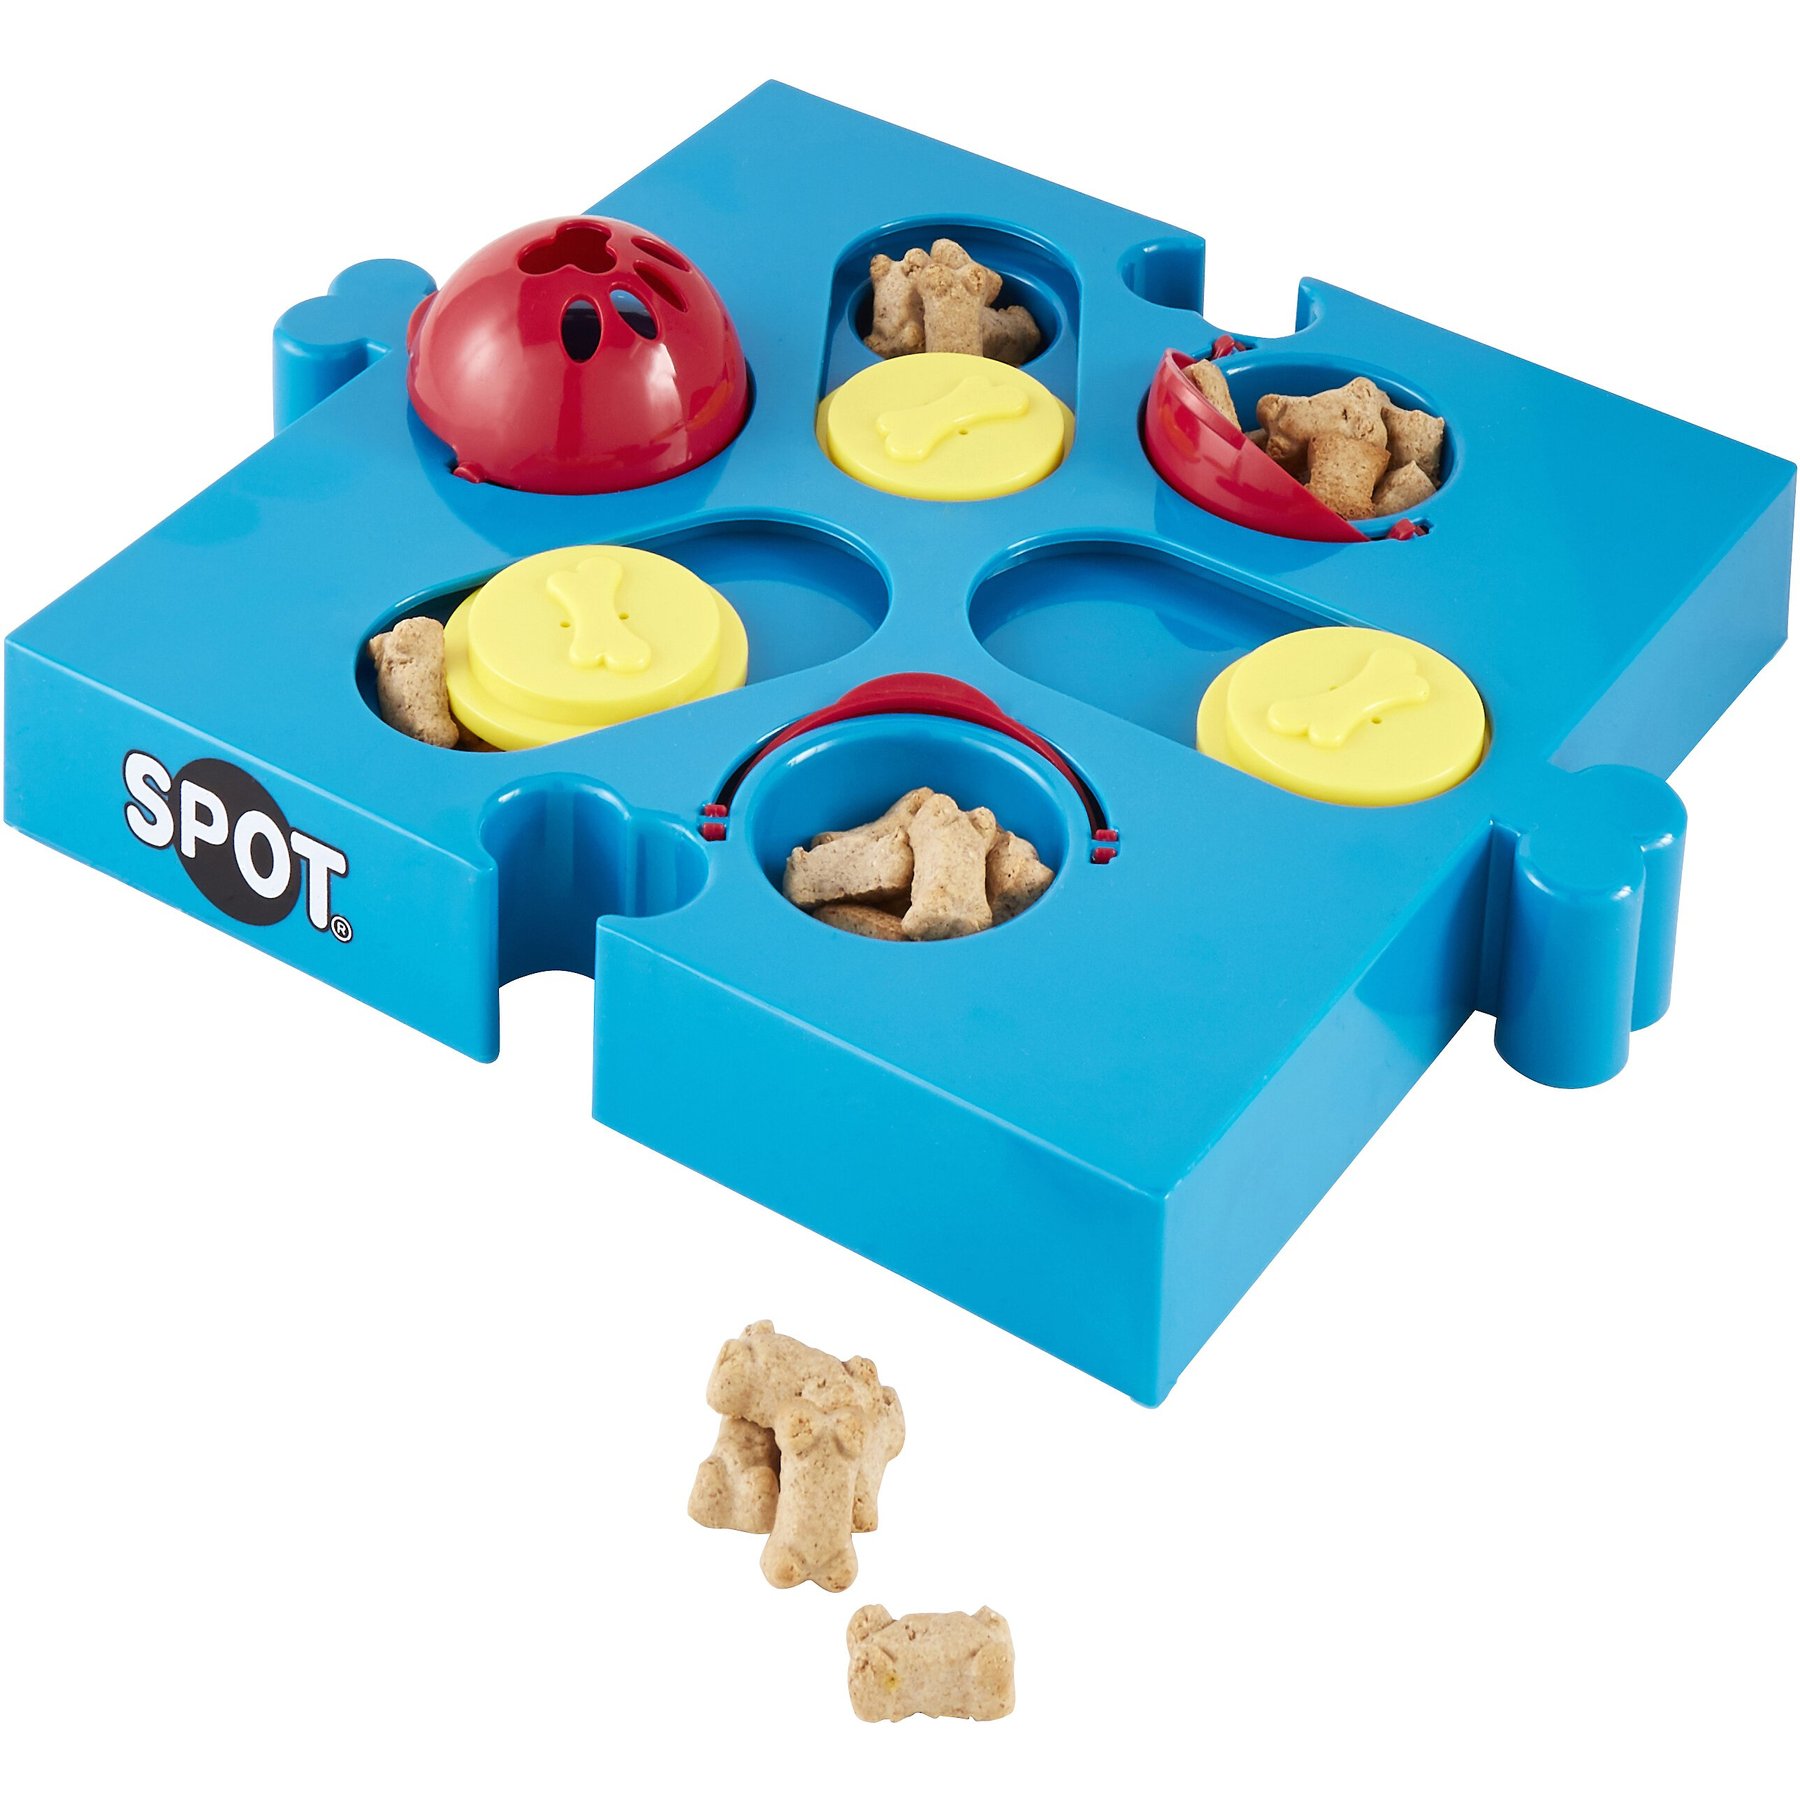 Seek-A-Treat Flip and Flap Puzzle - Dog Knee Surgery and Ligament